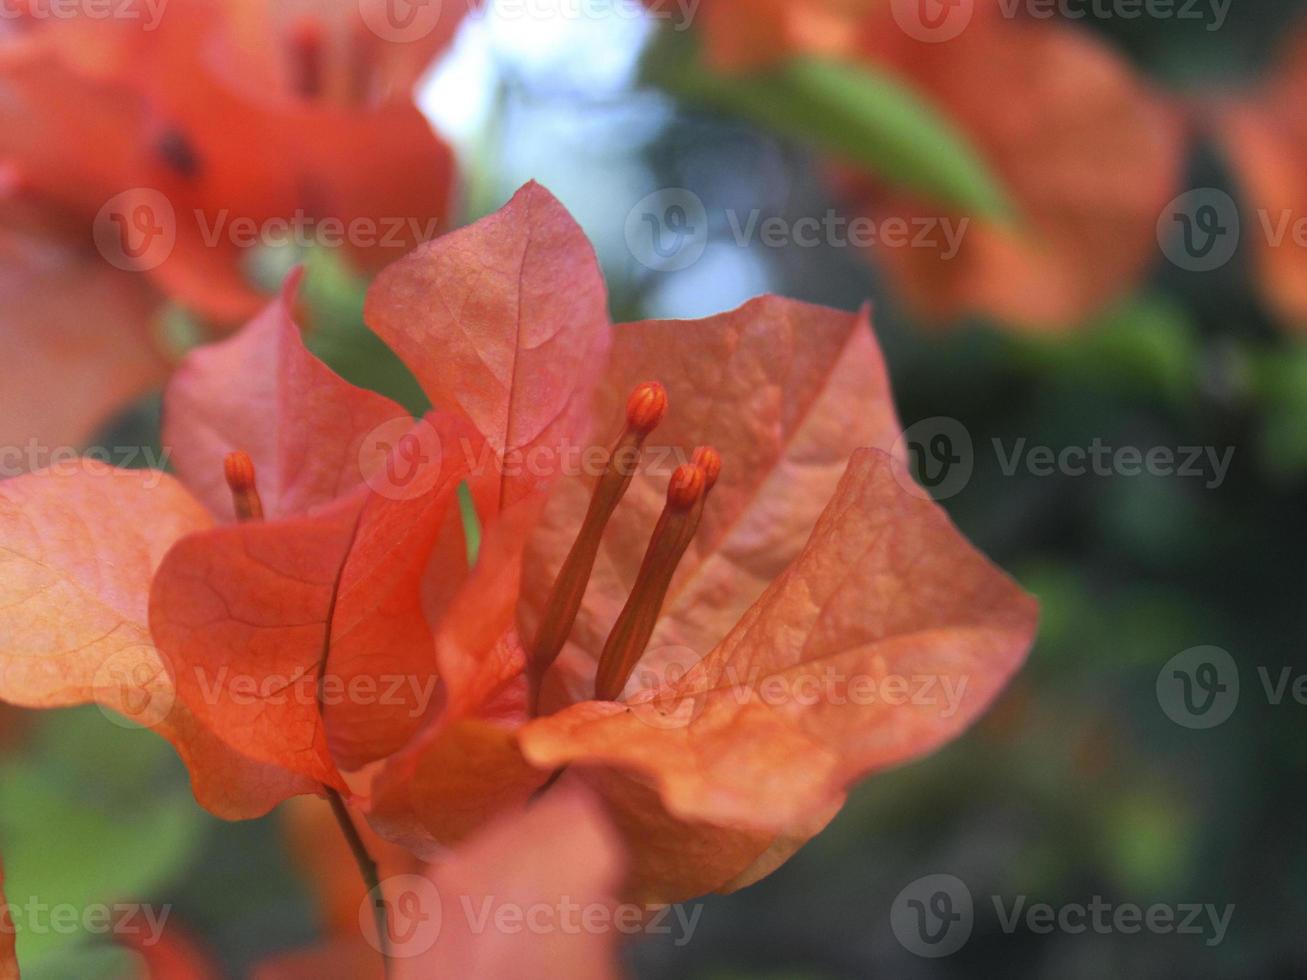 The orange bougainvillea plant is blooming profusely in the garden photo